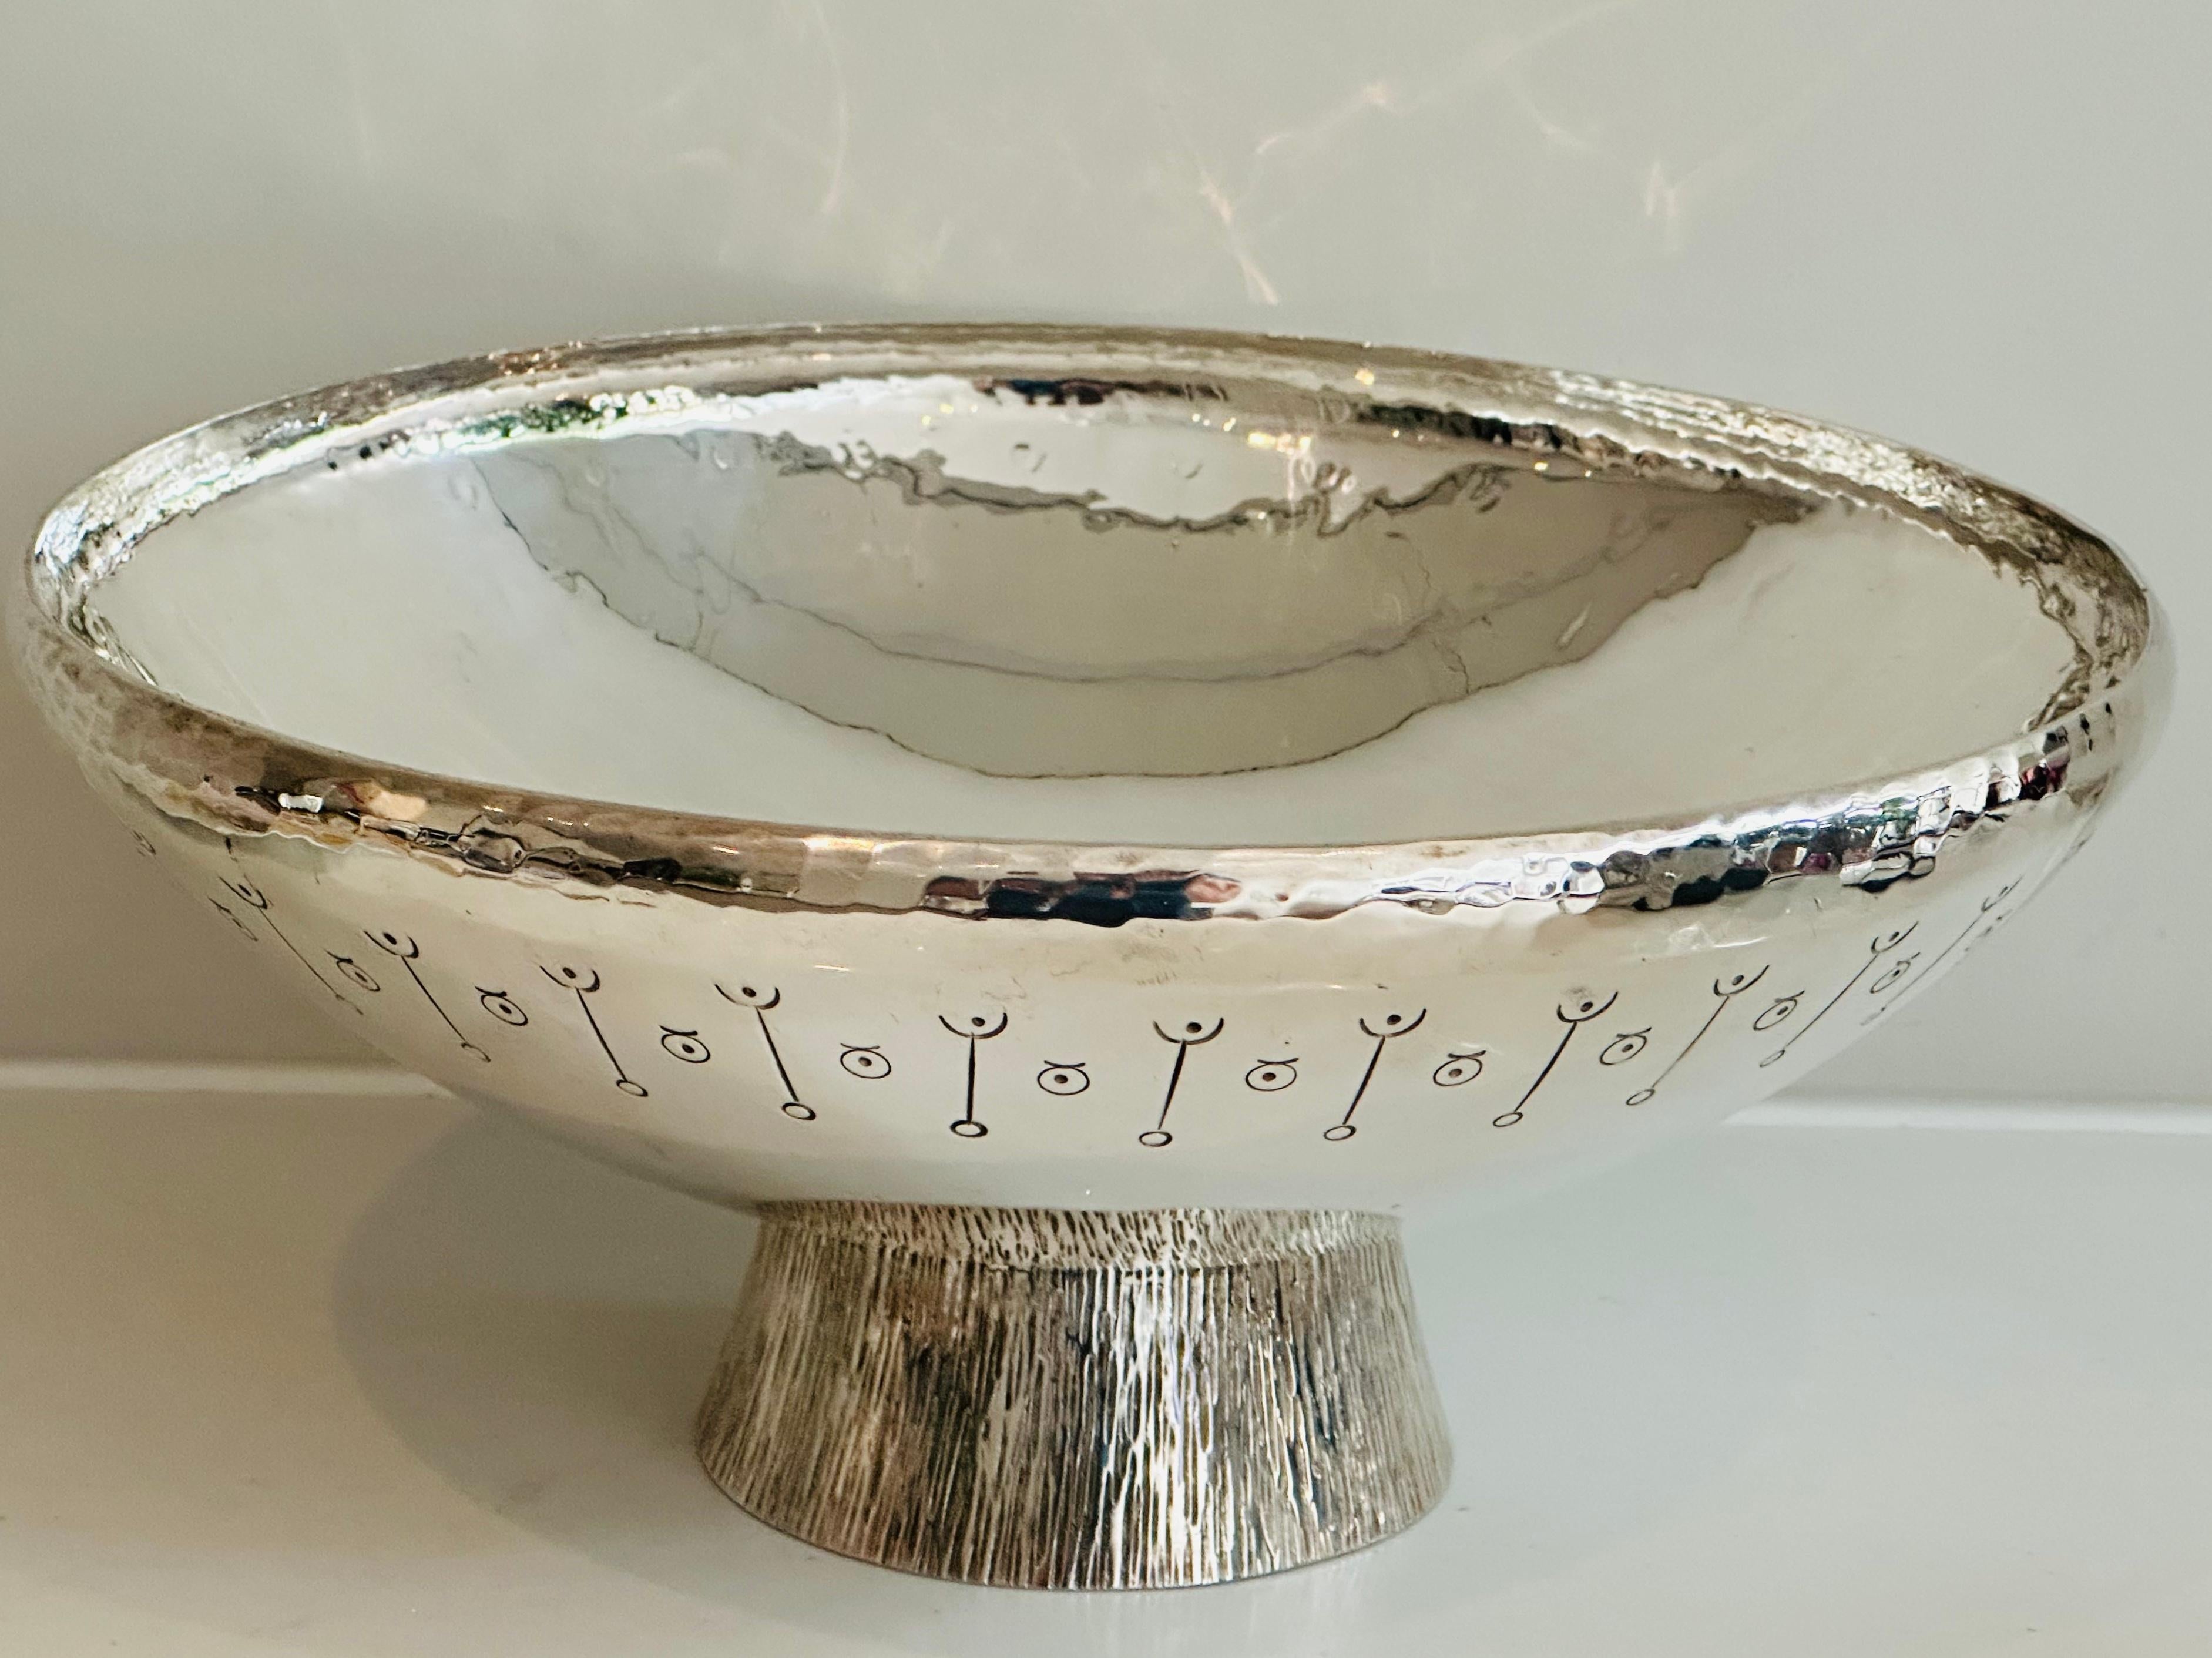 1980s English Silver Plated Decorative Hand-Hammered Serving or Display Bowl For Sale 1